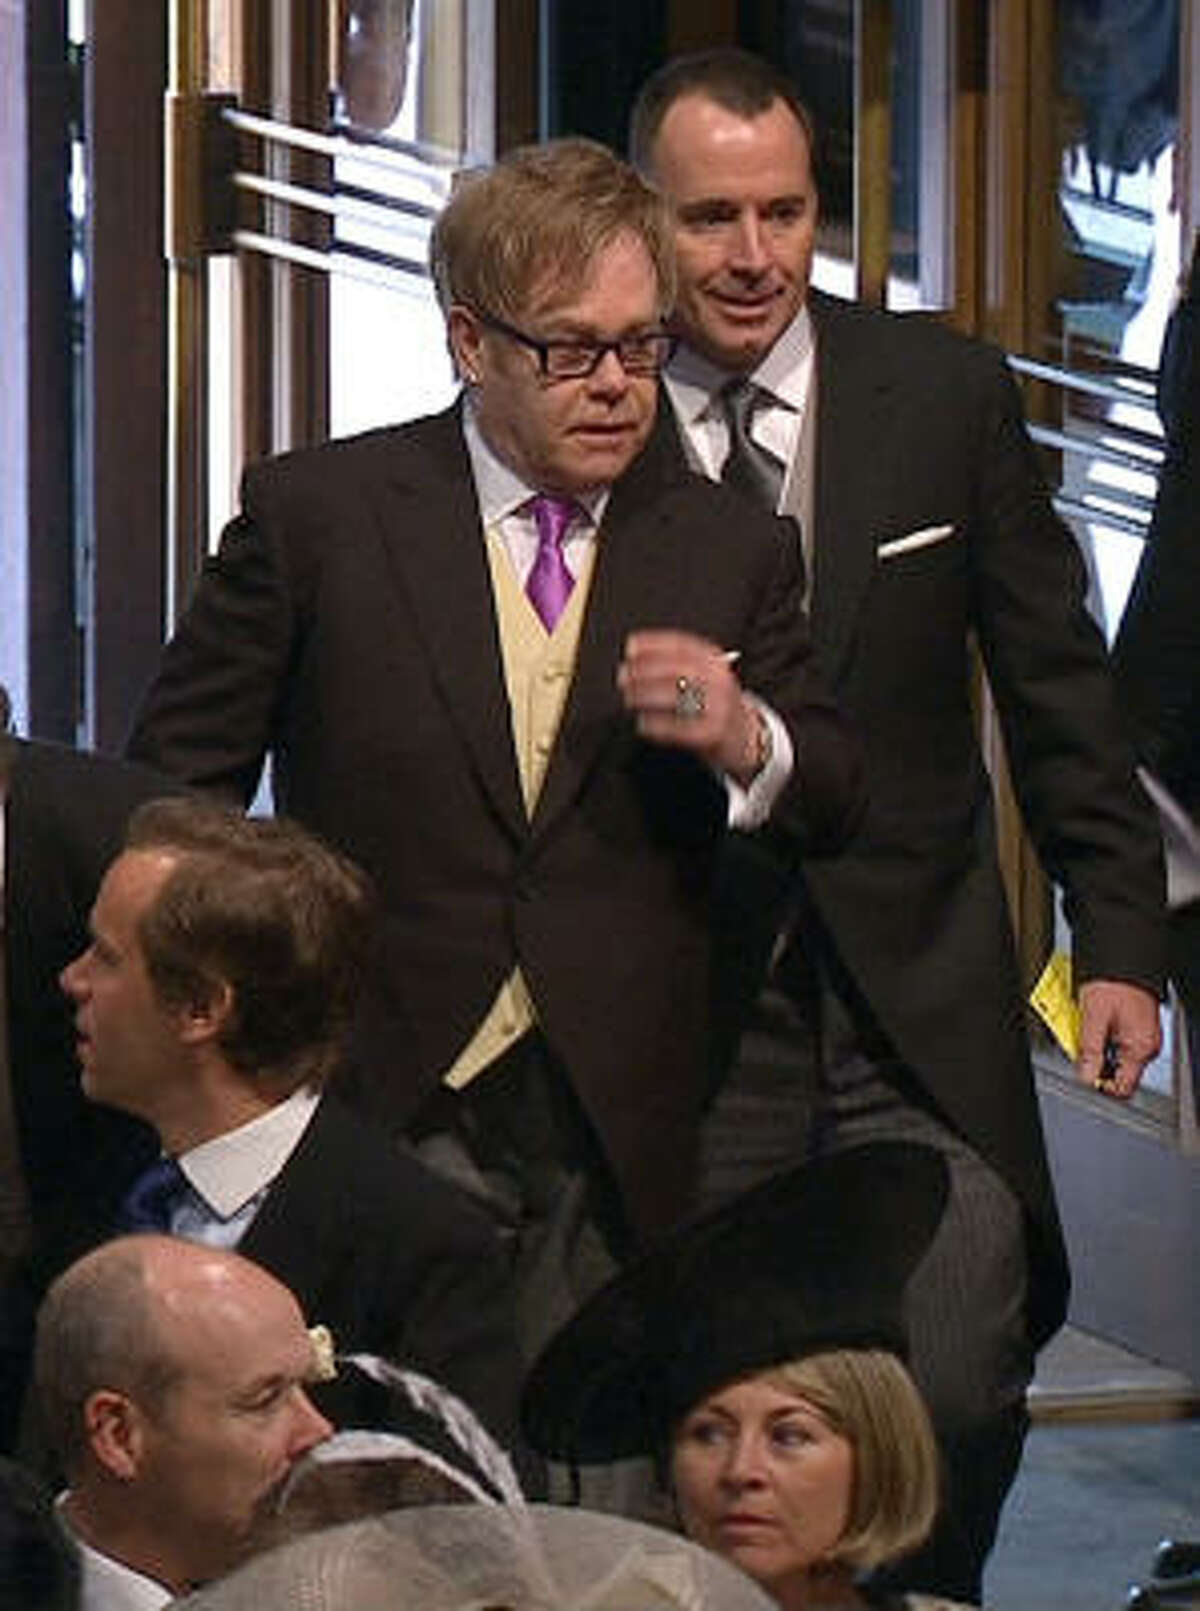 In this image taken from video, British singer Elton John, left, and his partner David Furnish arrive at Westminster Abbey.